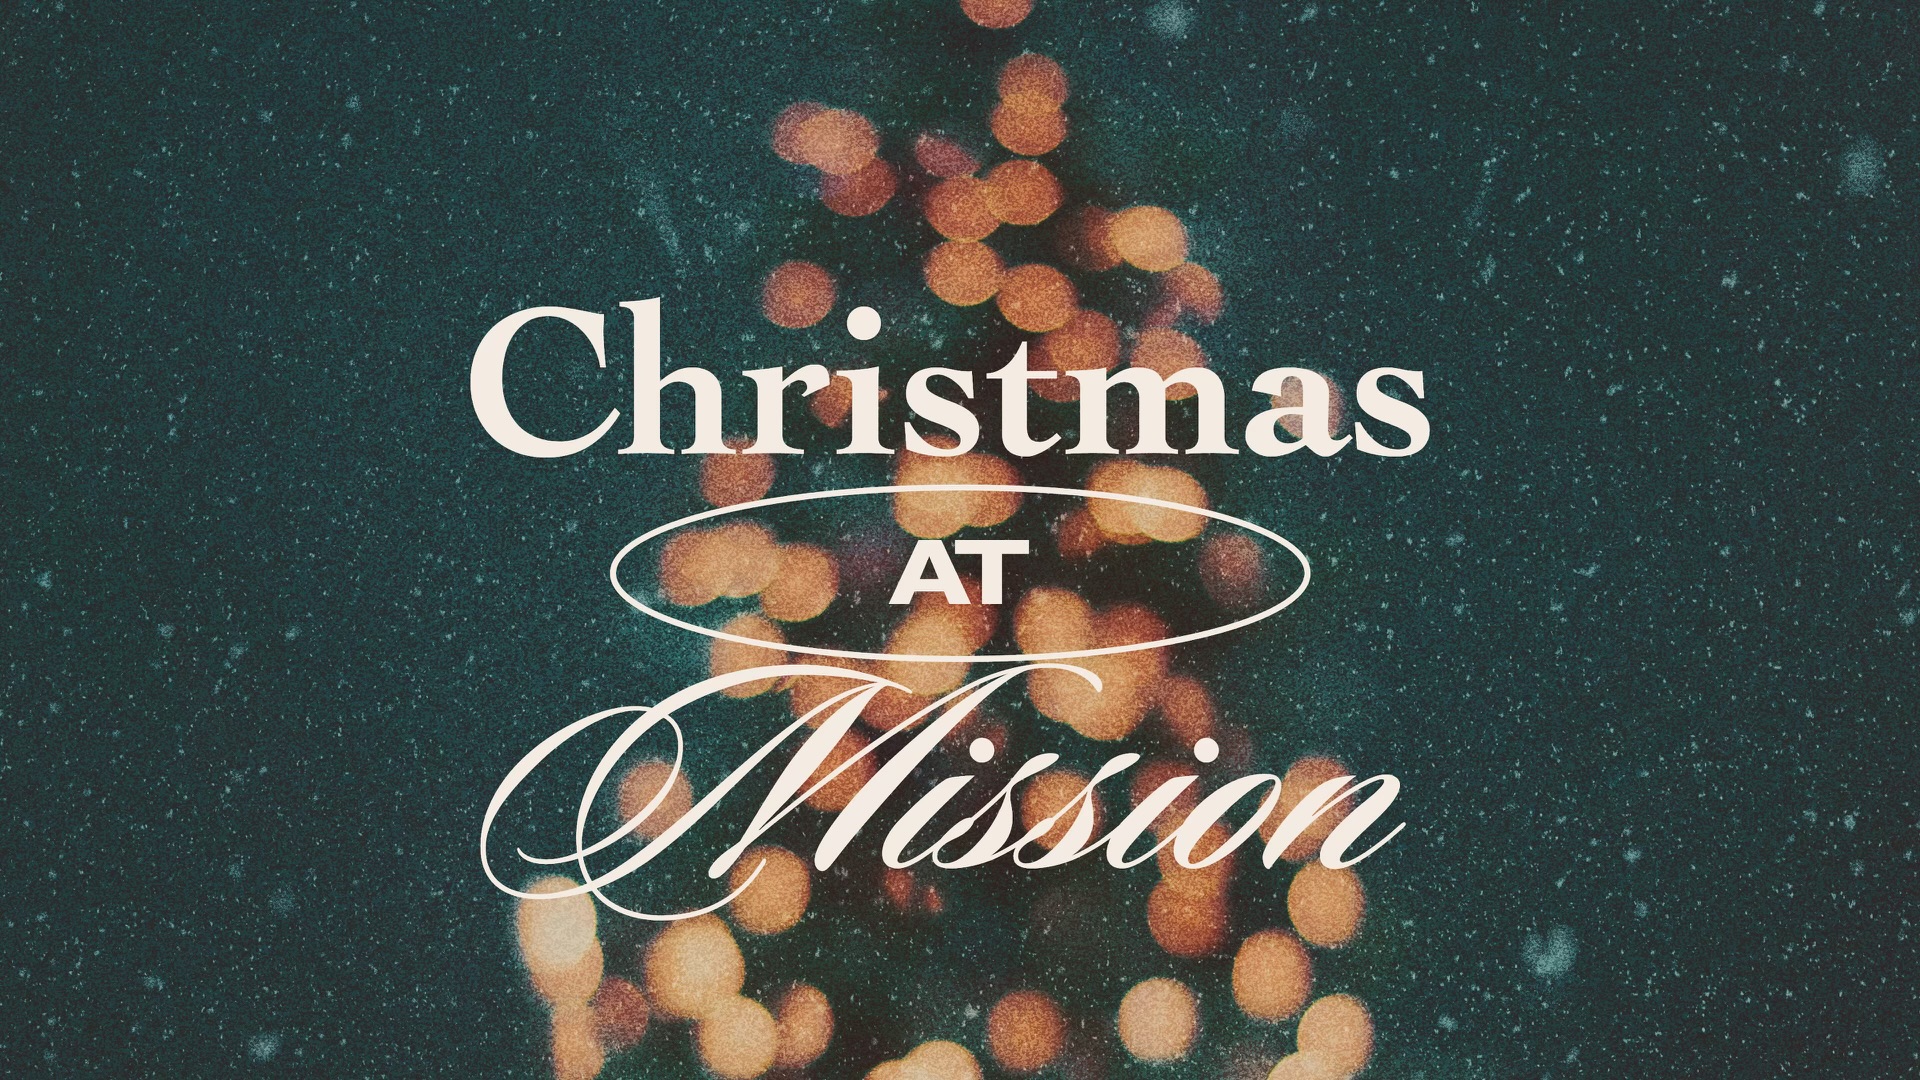 Christmas at Mission